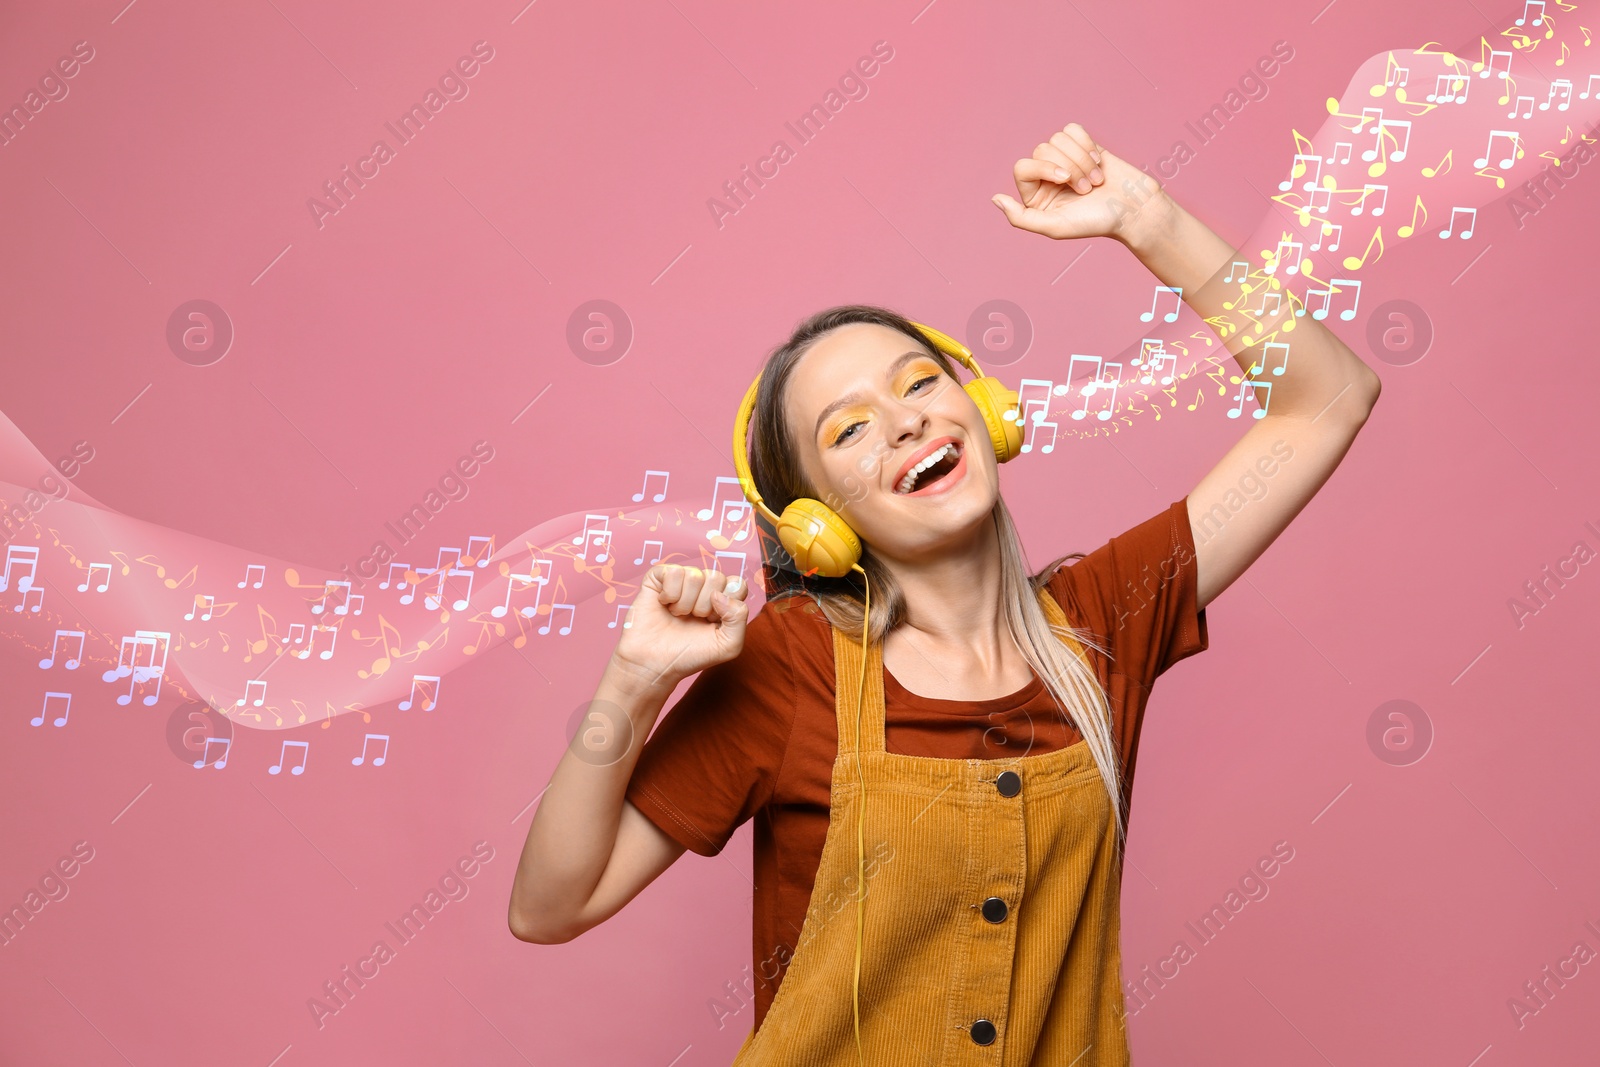 Image of Beautiful happy woman listening to music on pink background. Music notes illustrations flowing from headphones